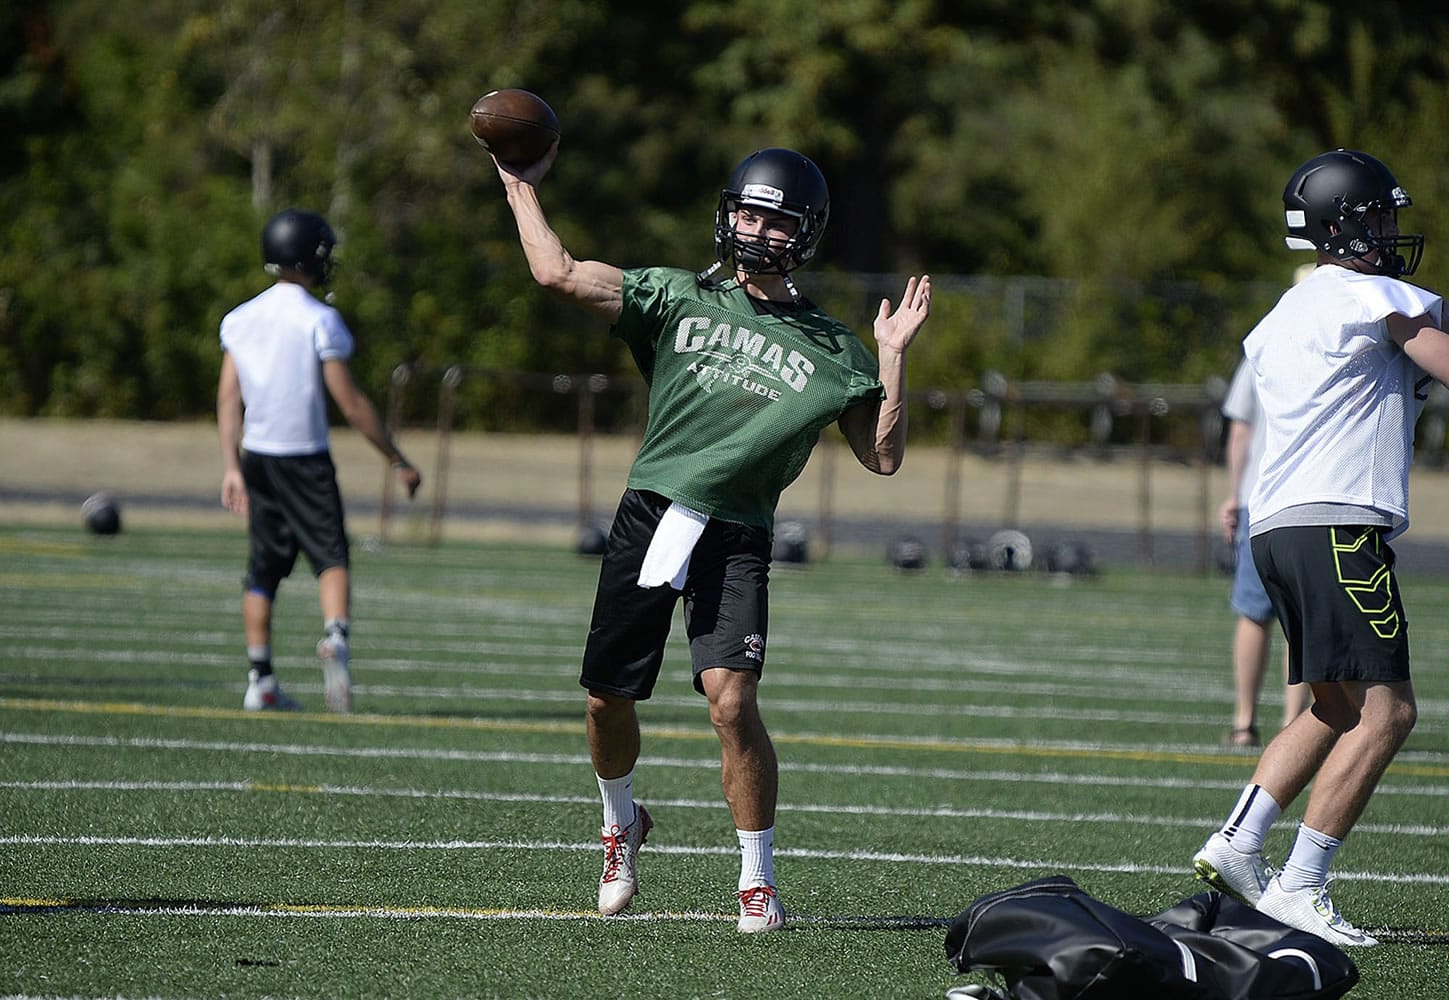 Camas High School's Liam Fitzgerald, center, throws to a teammate during practice Wednesday afternoon, August 19, 2015, at the school's practice field.